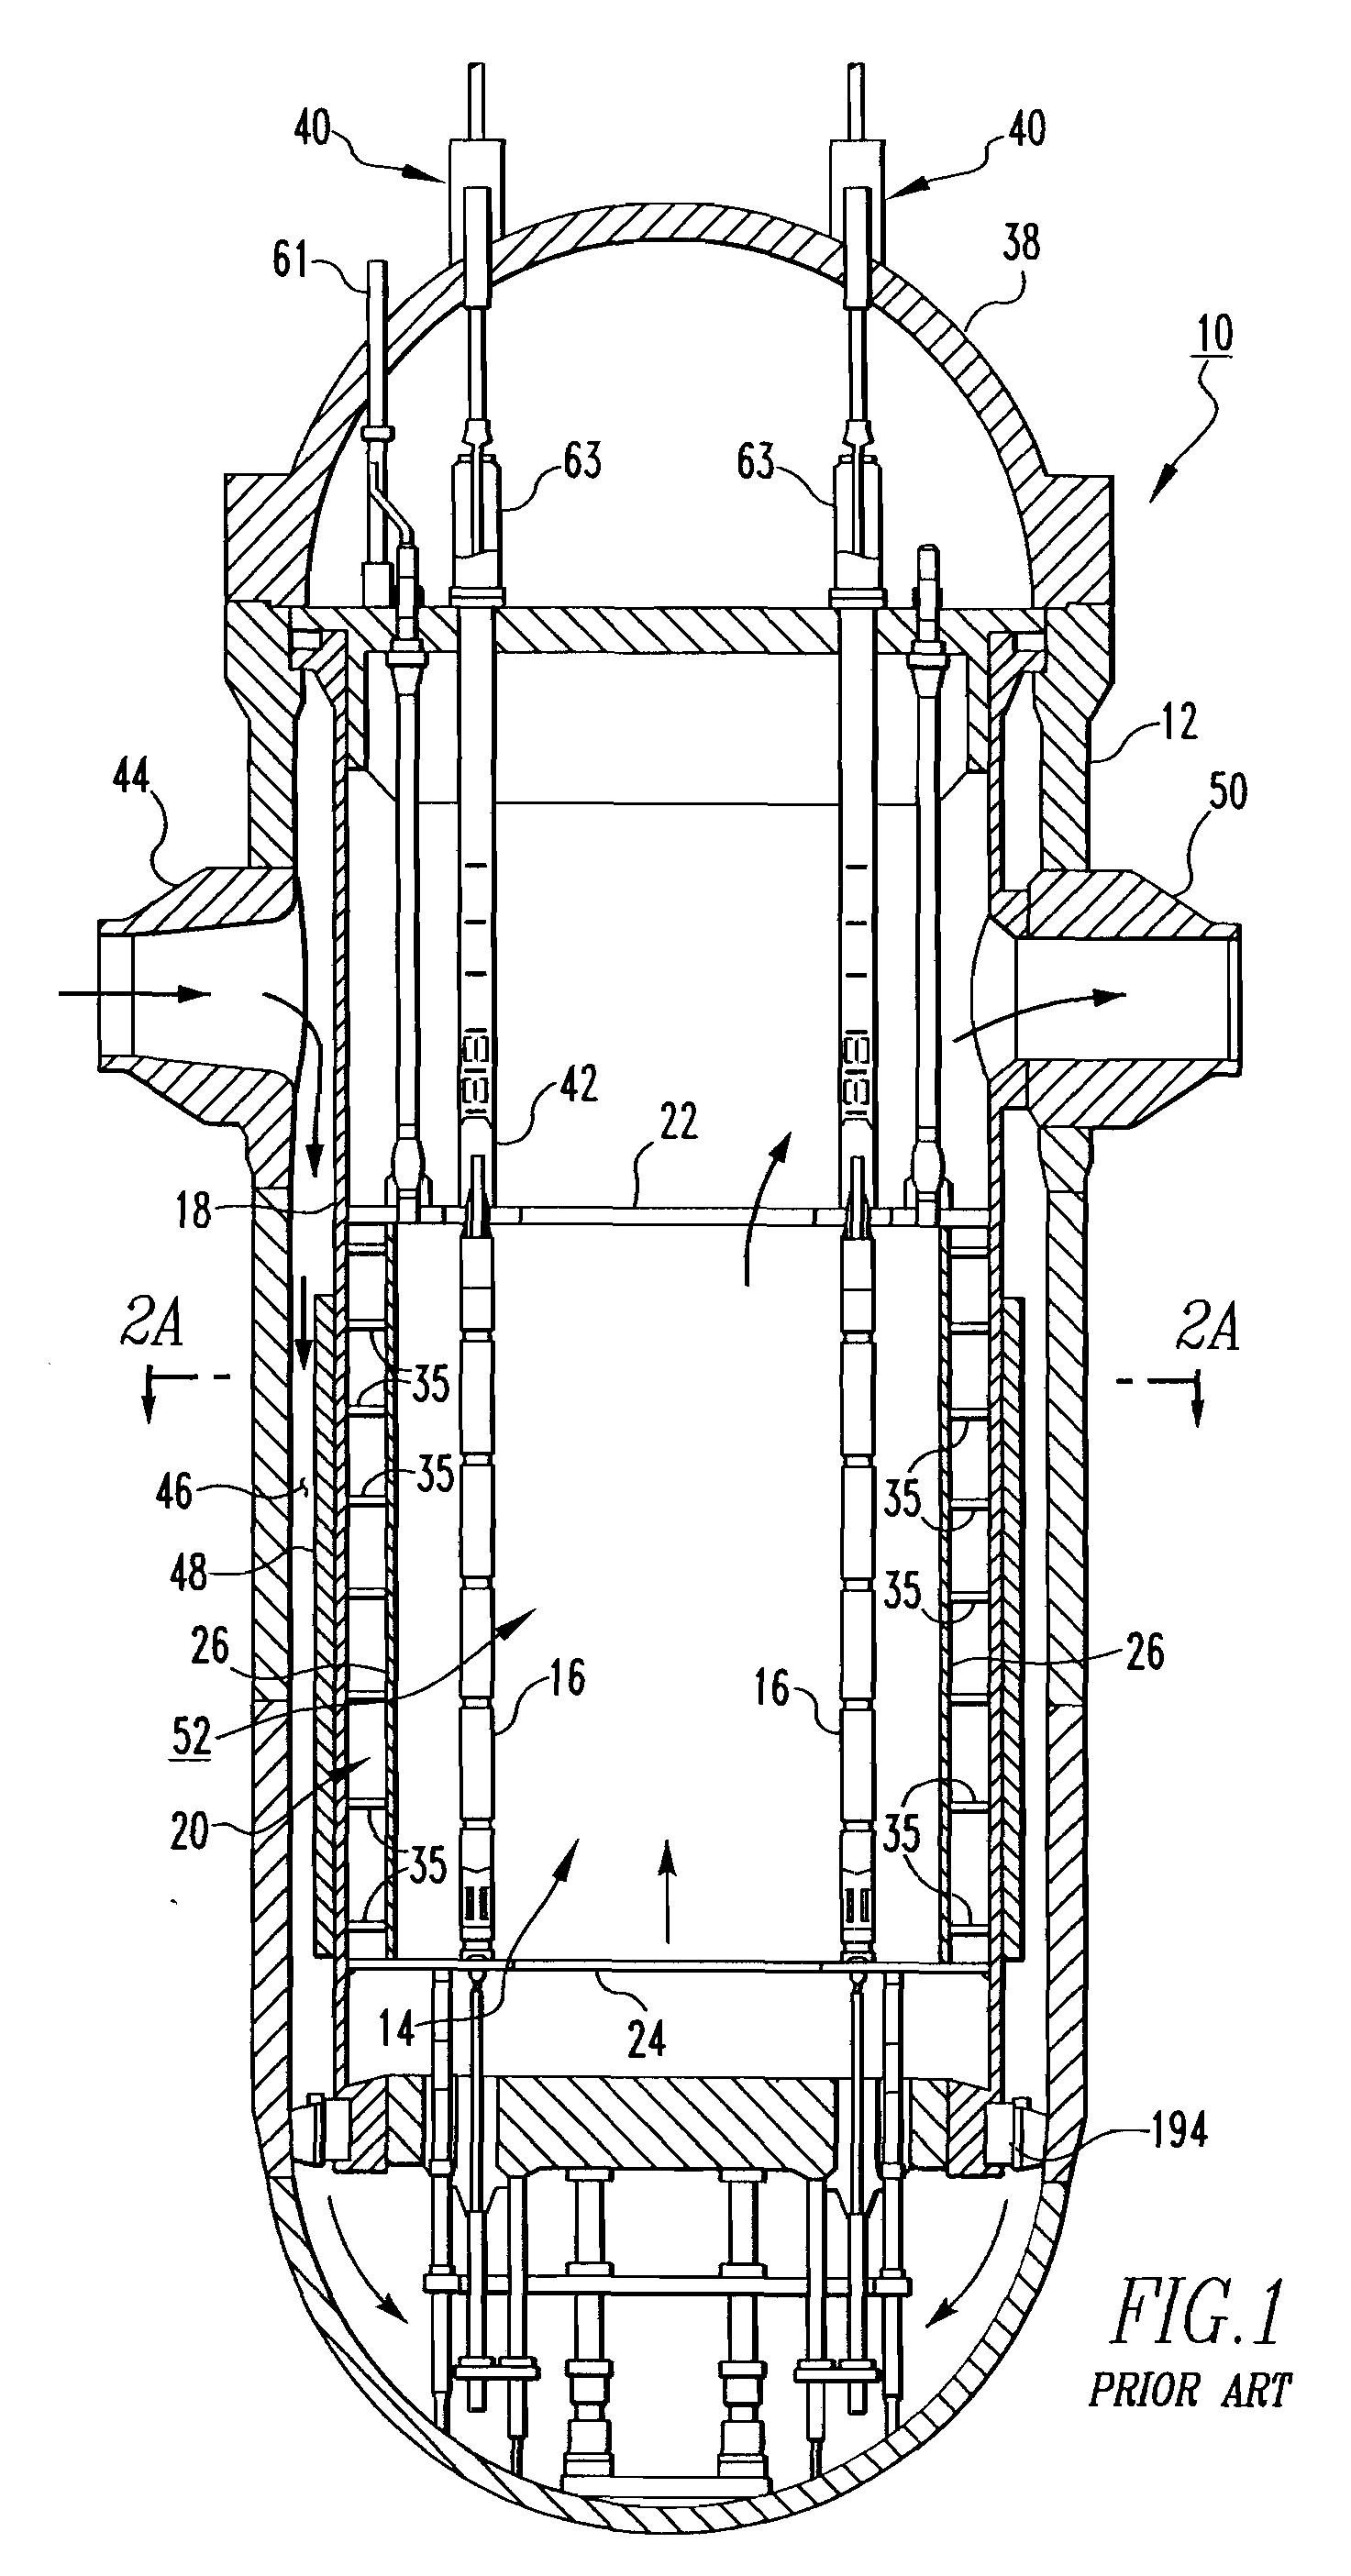 Method and tooling for dismantling, casking and removal of nuclear reactor core structures